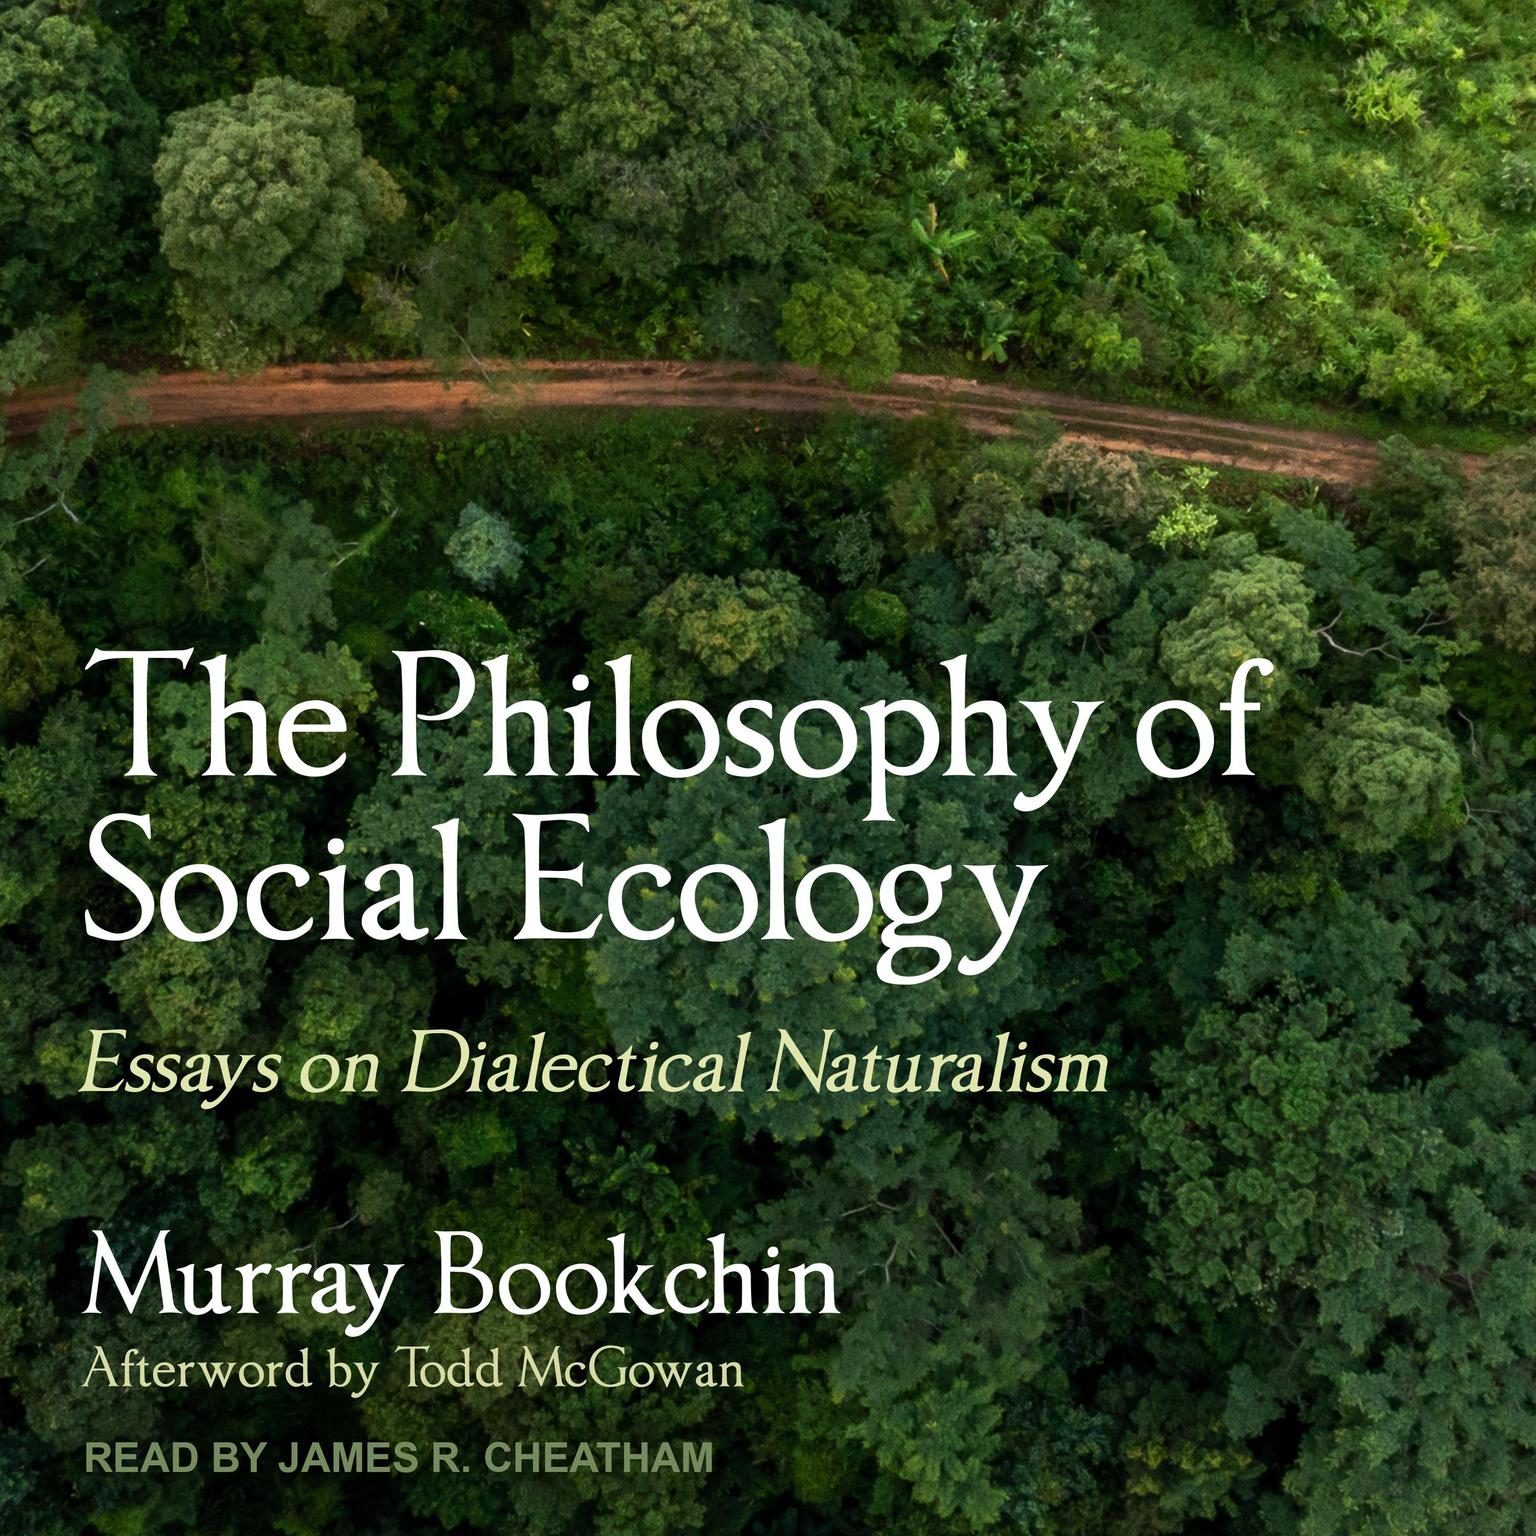 The Philosophy of Social Ecology: Essays on Dialectical Naturalism Audiobook, by Murray Bookchin